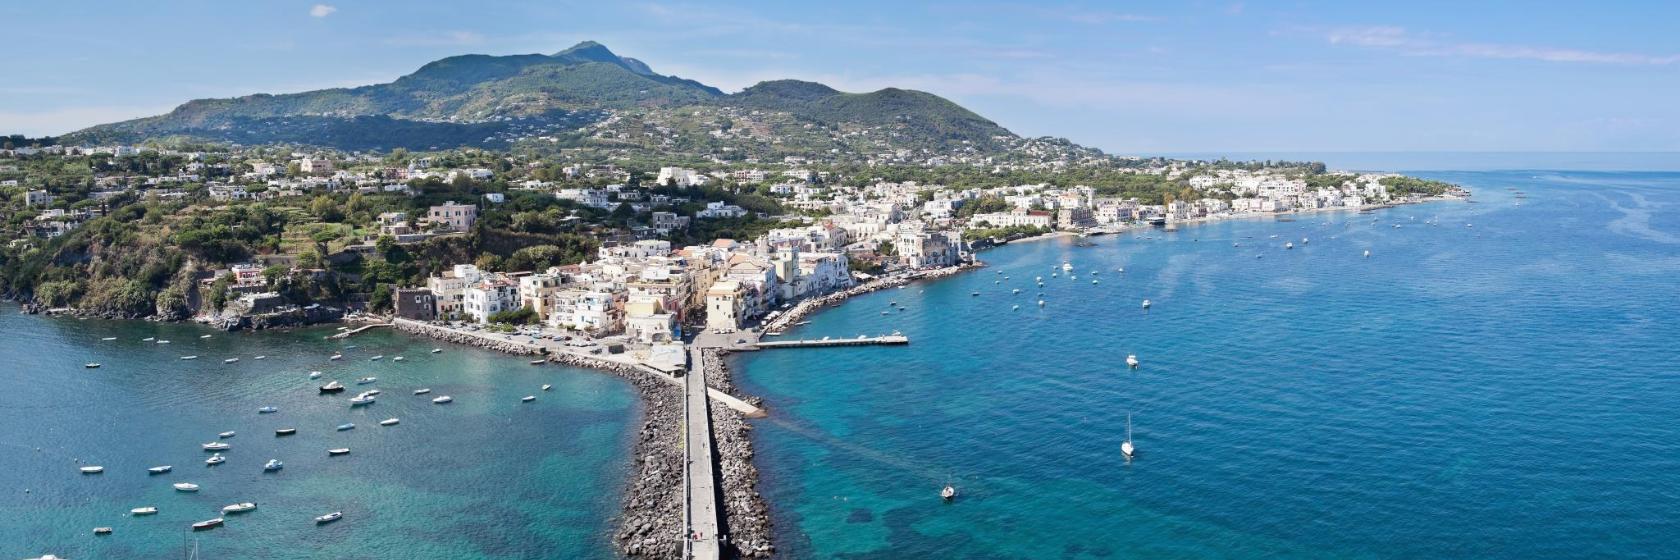 10 Top-Rated hotels in Ischia Ponte